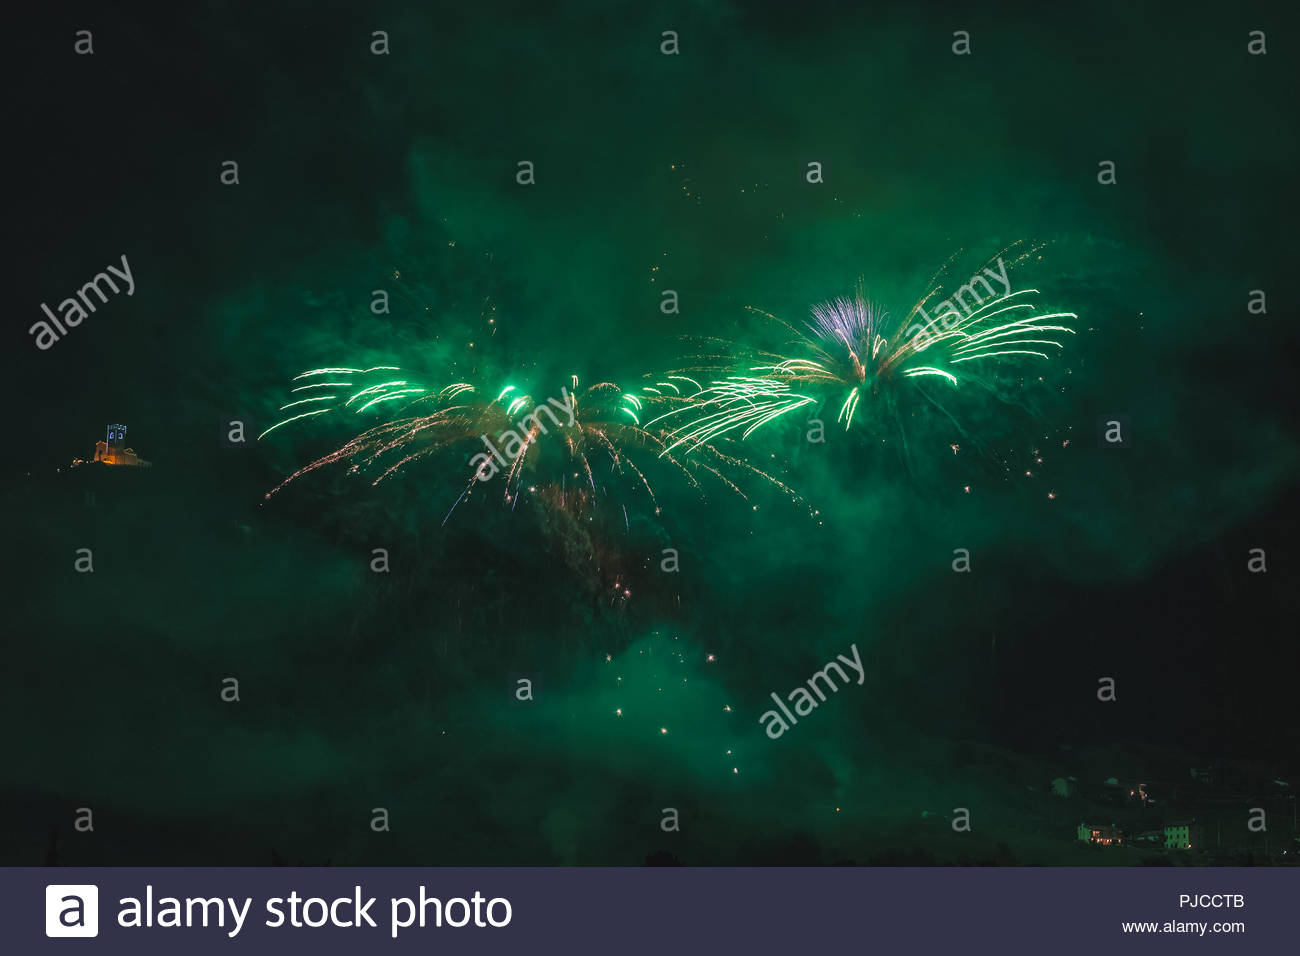 Awesome Couple Of Green Fireworks On The Feast Patron Saint